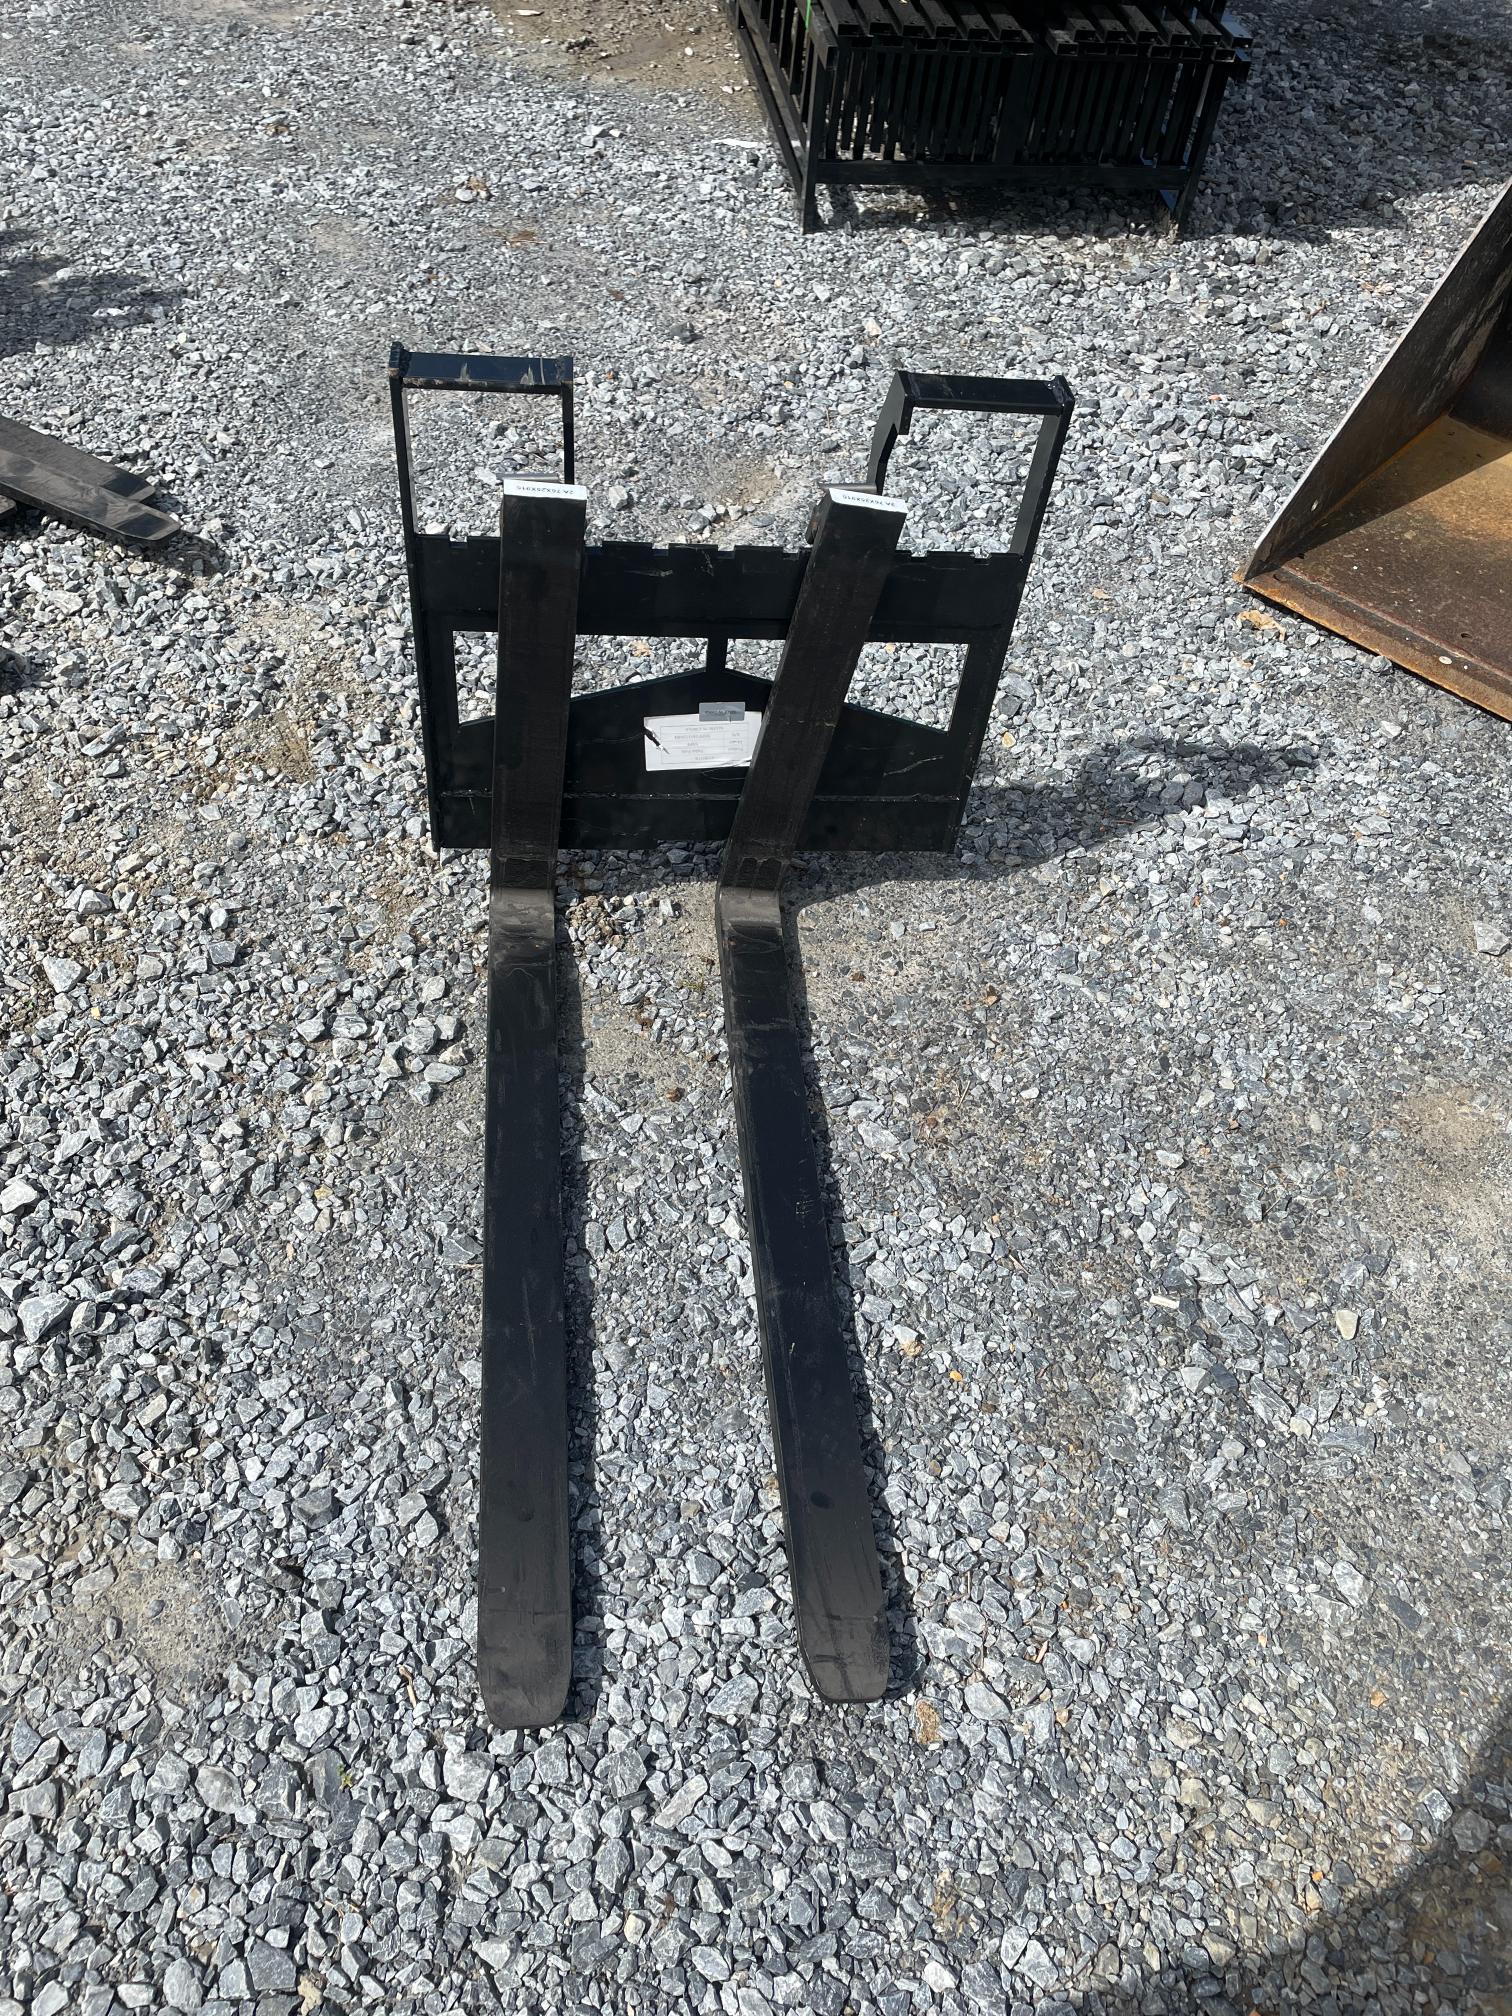 New AGT Mini Quick Attach Pallet Forks